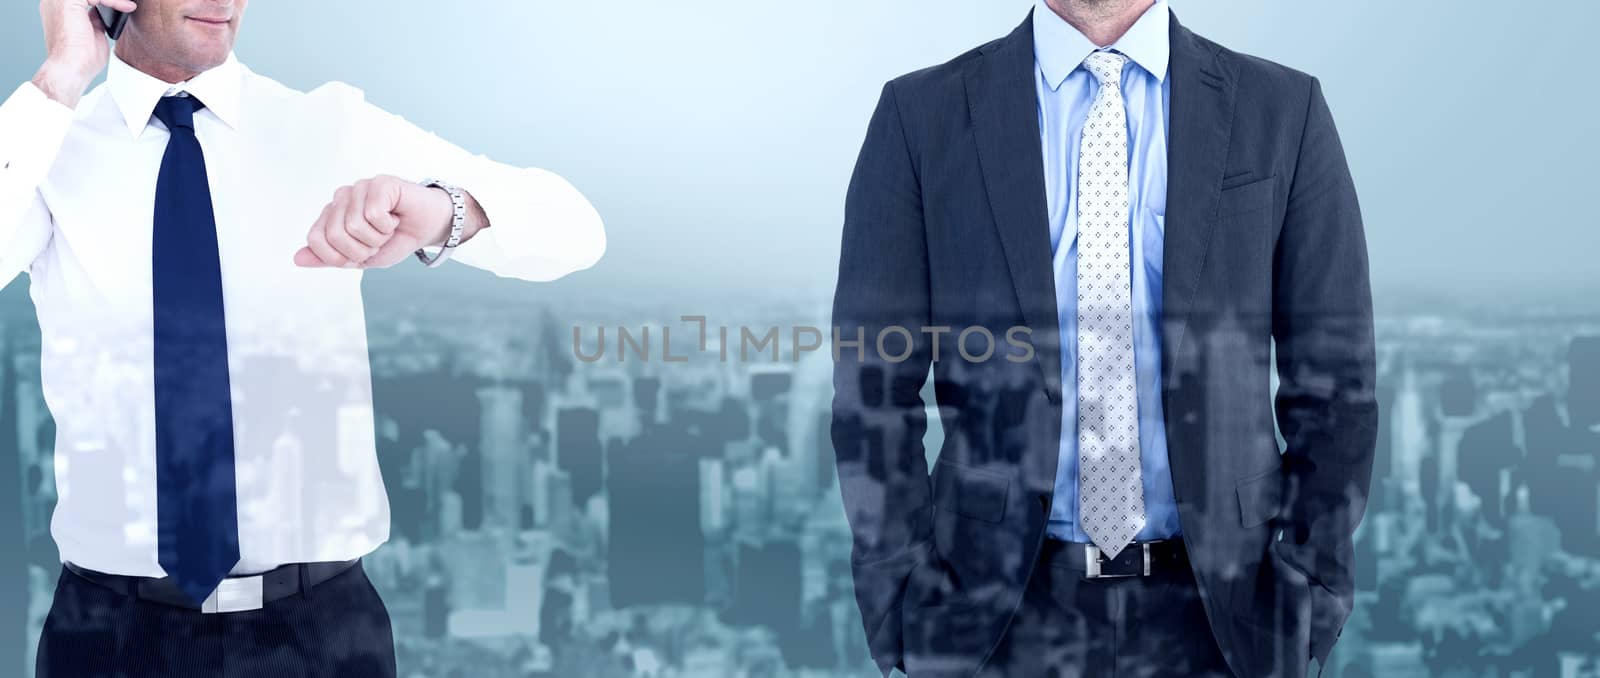 Composite image of businessman on the phone looking at his wrist watch by Wavebreakmedia